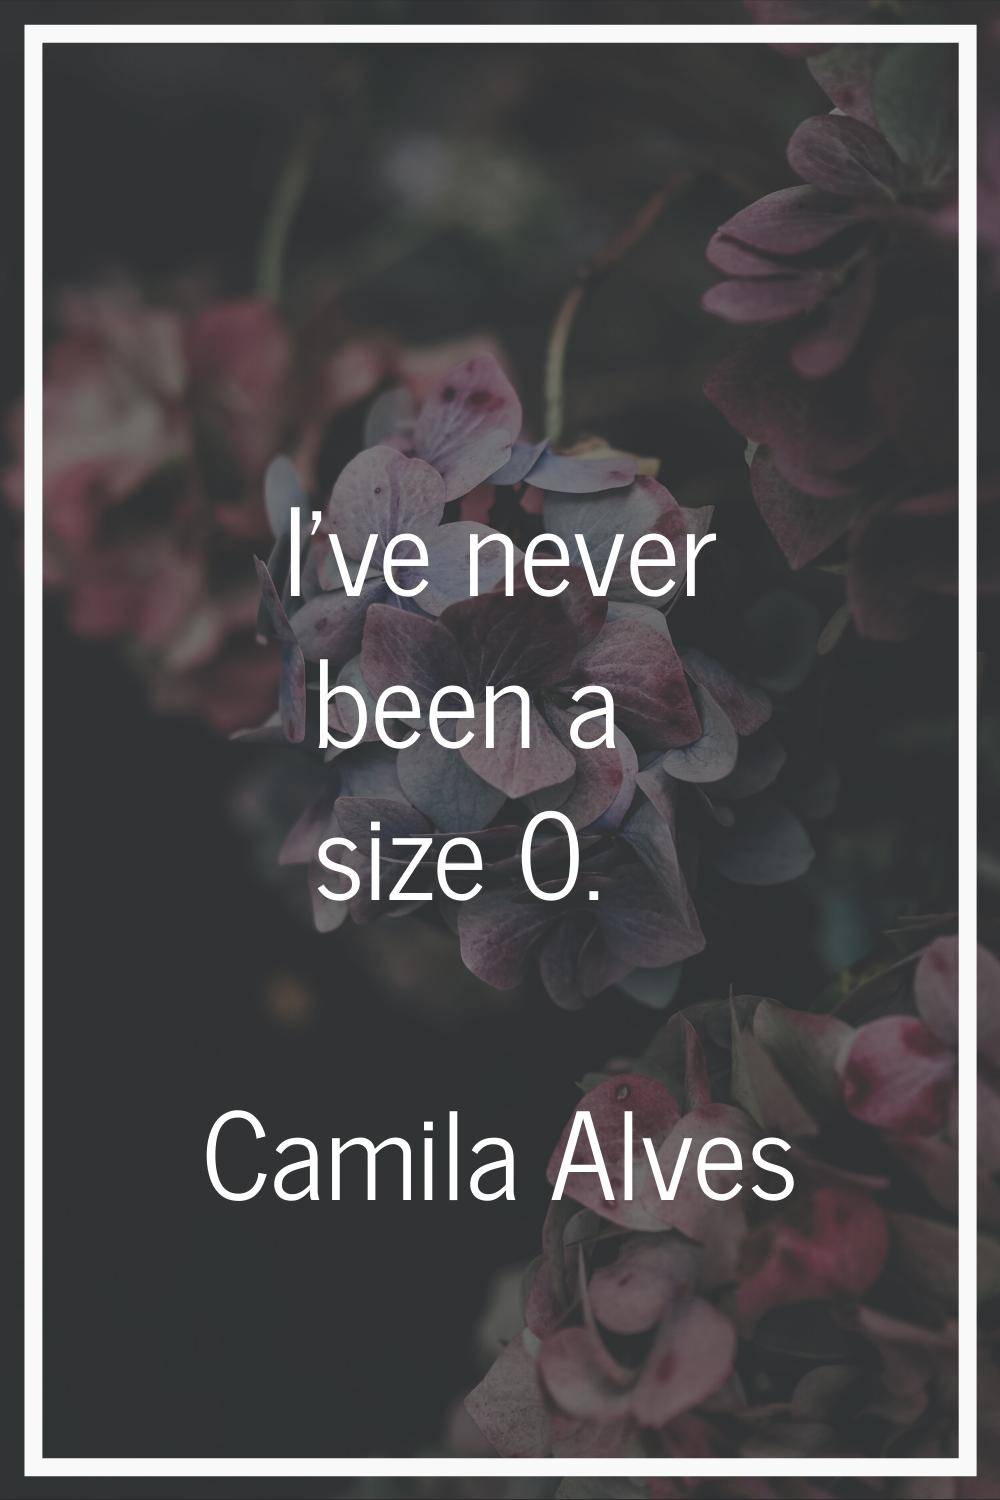 I've never been a size 0.